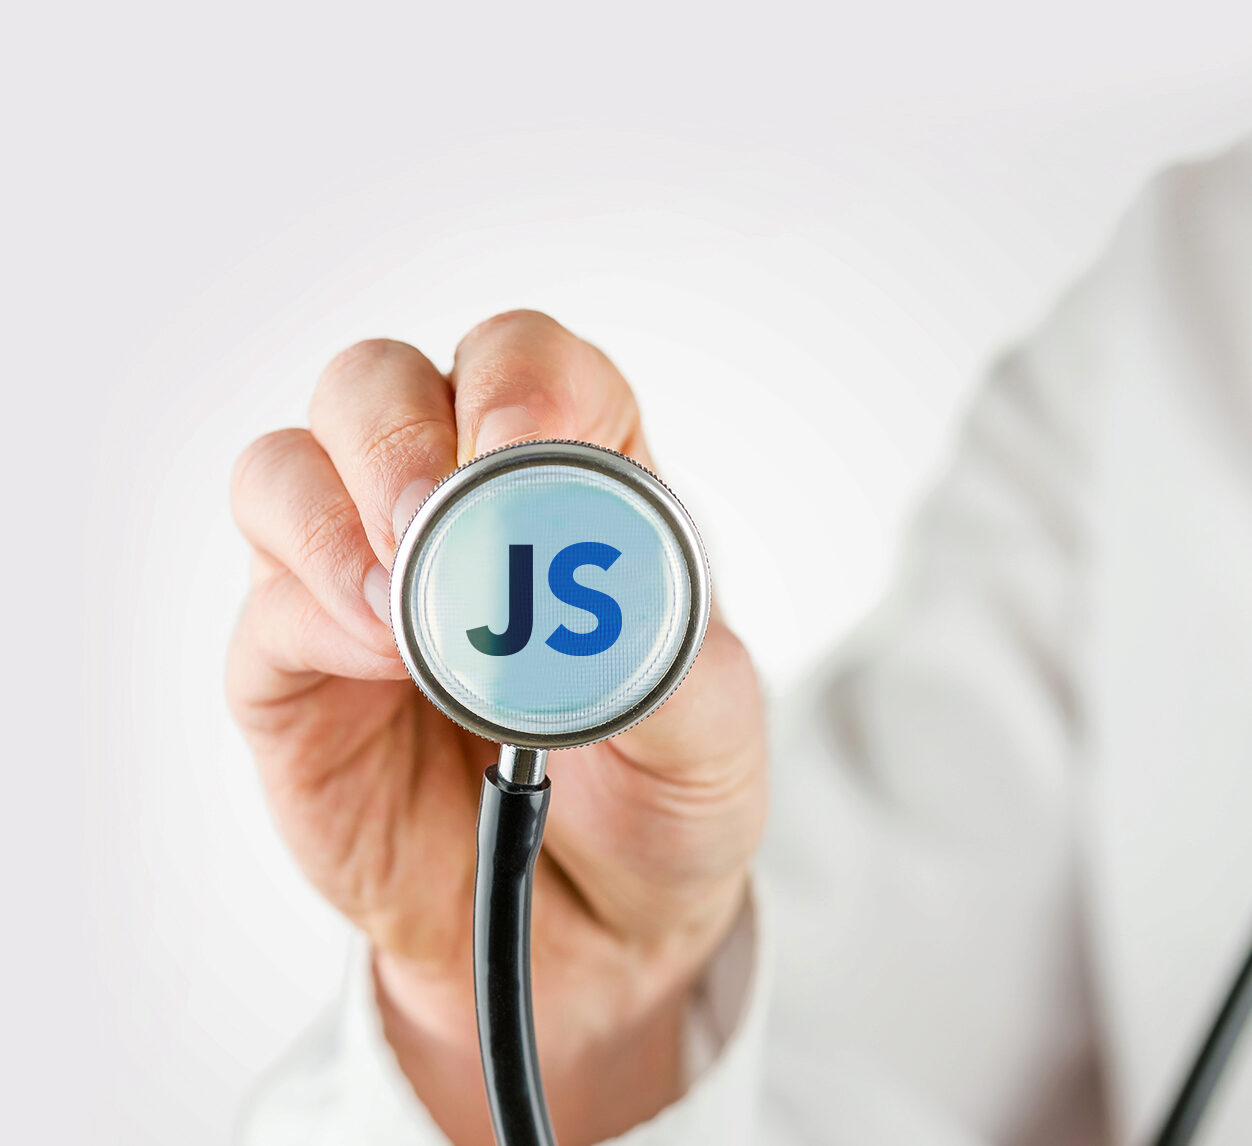 A doctor holding a stethoscope with the JobScore logo intials on it.